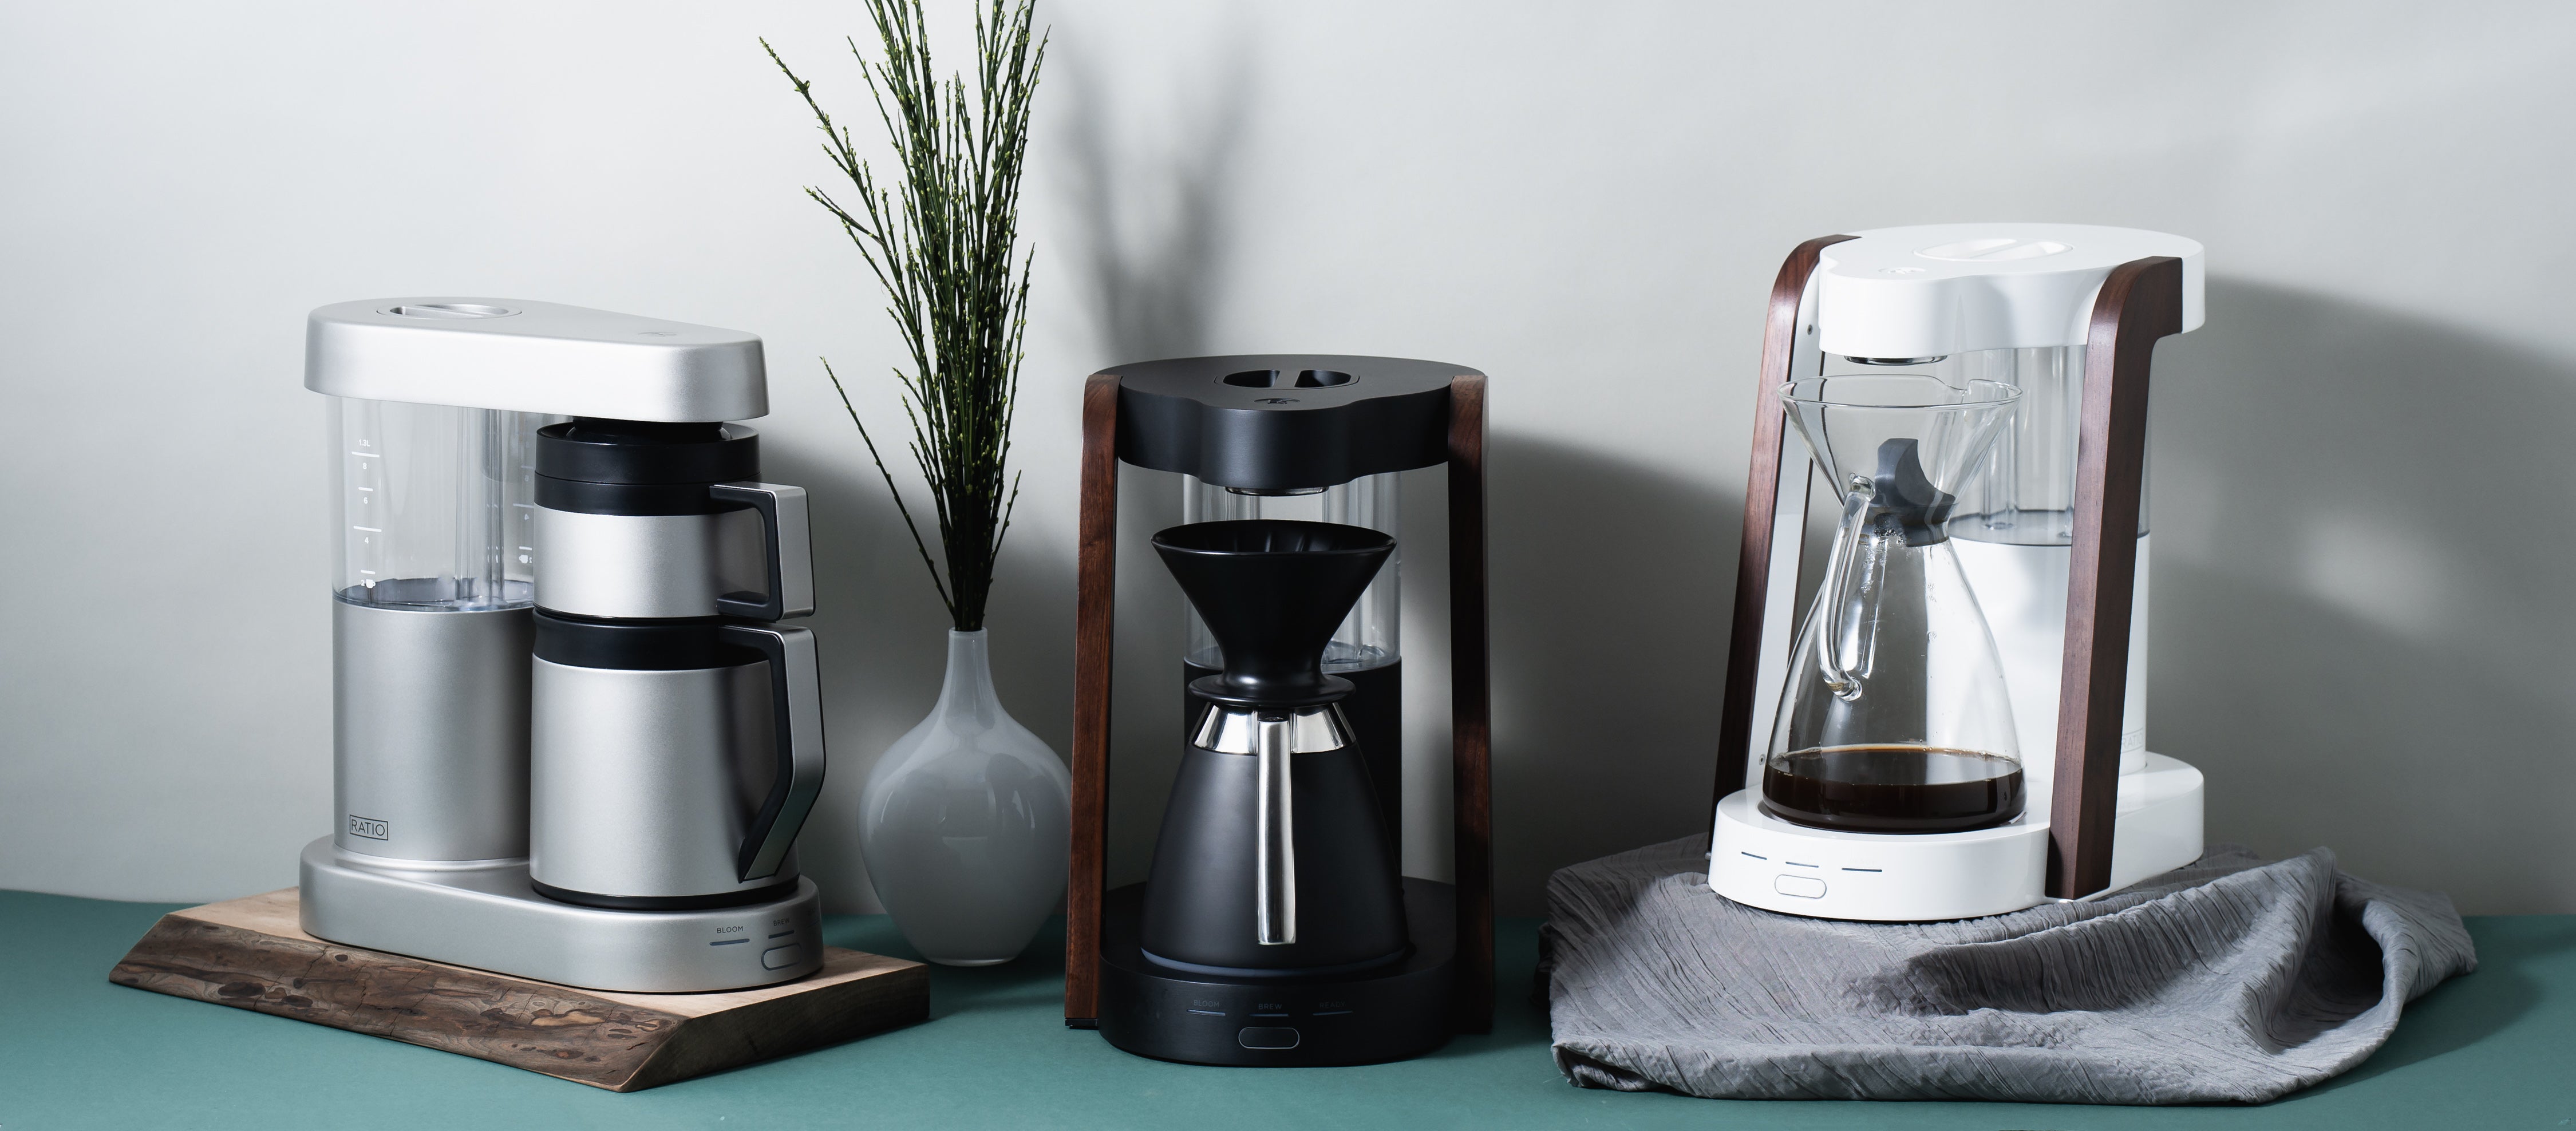 Ratio Six 8-Cup Coffee Brewer